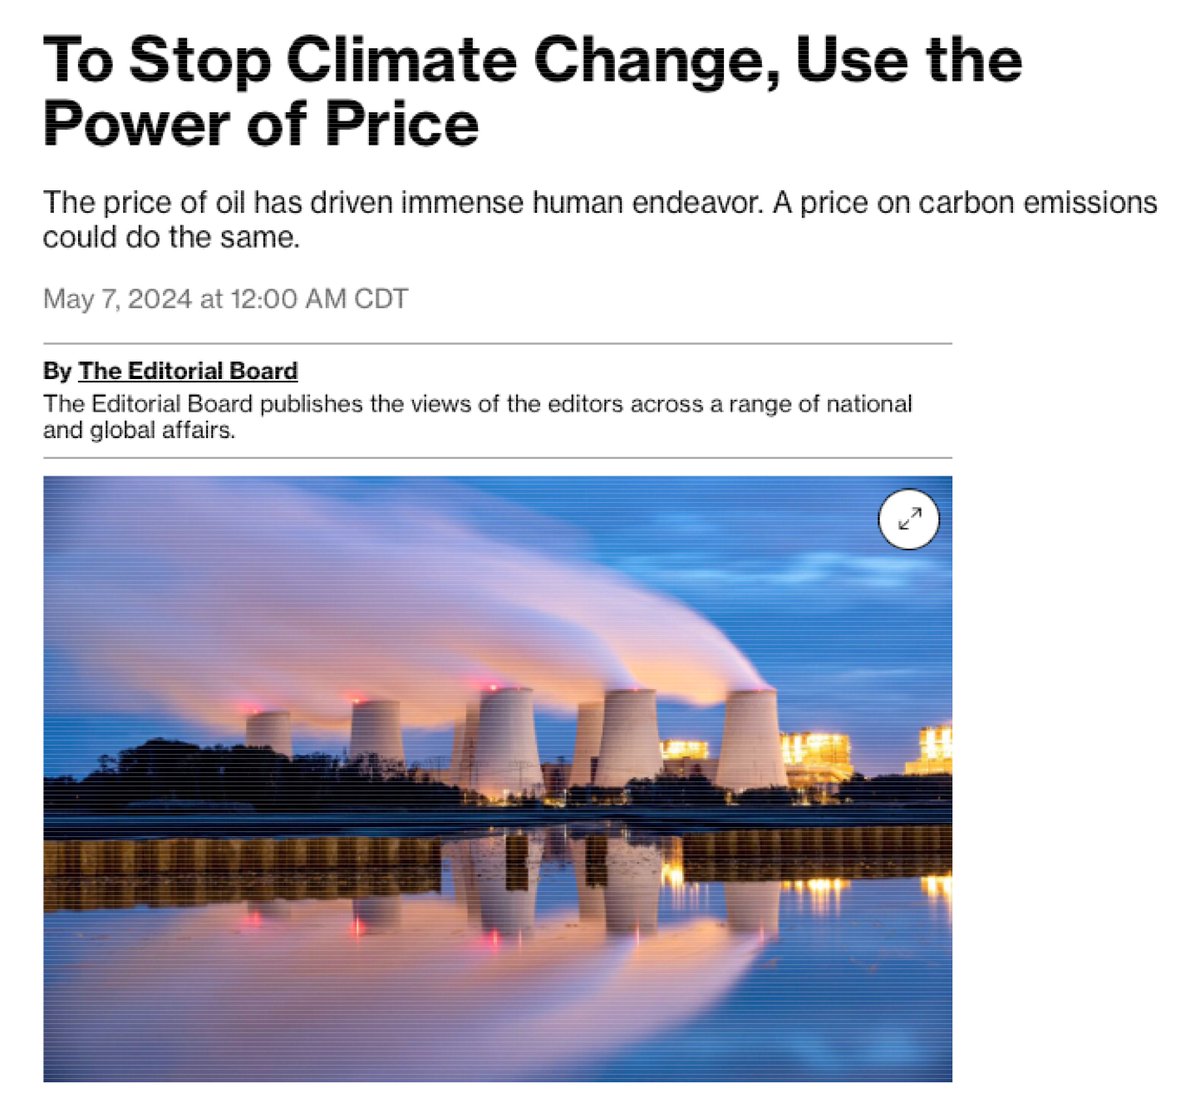 POLLUTER PAY is the only effective approach.

Let's stop dicking around, guys @opinion 

bloomberg.com/opinion/articl…
#energy #EnergyTransition #ClimateActionNow #renewables #NetZero #FossilFuels